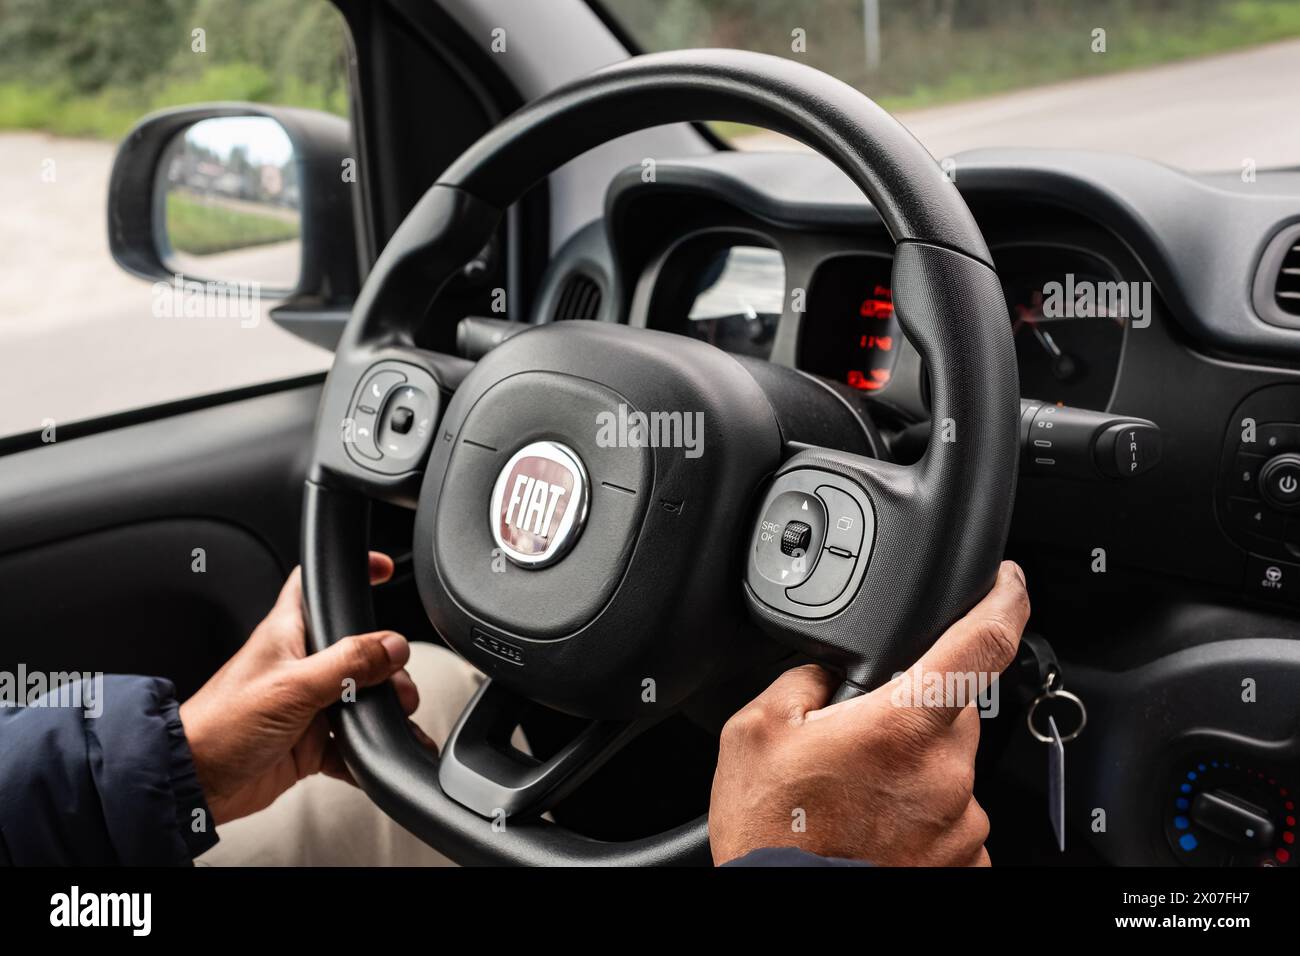 Interior of a car Fiat, steering wheel with a company logo. Hands on steering wheel of car driving on road. Man holds the steering wheel firmly with b Stock Photo